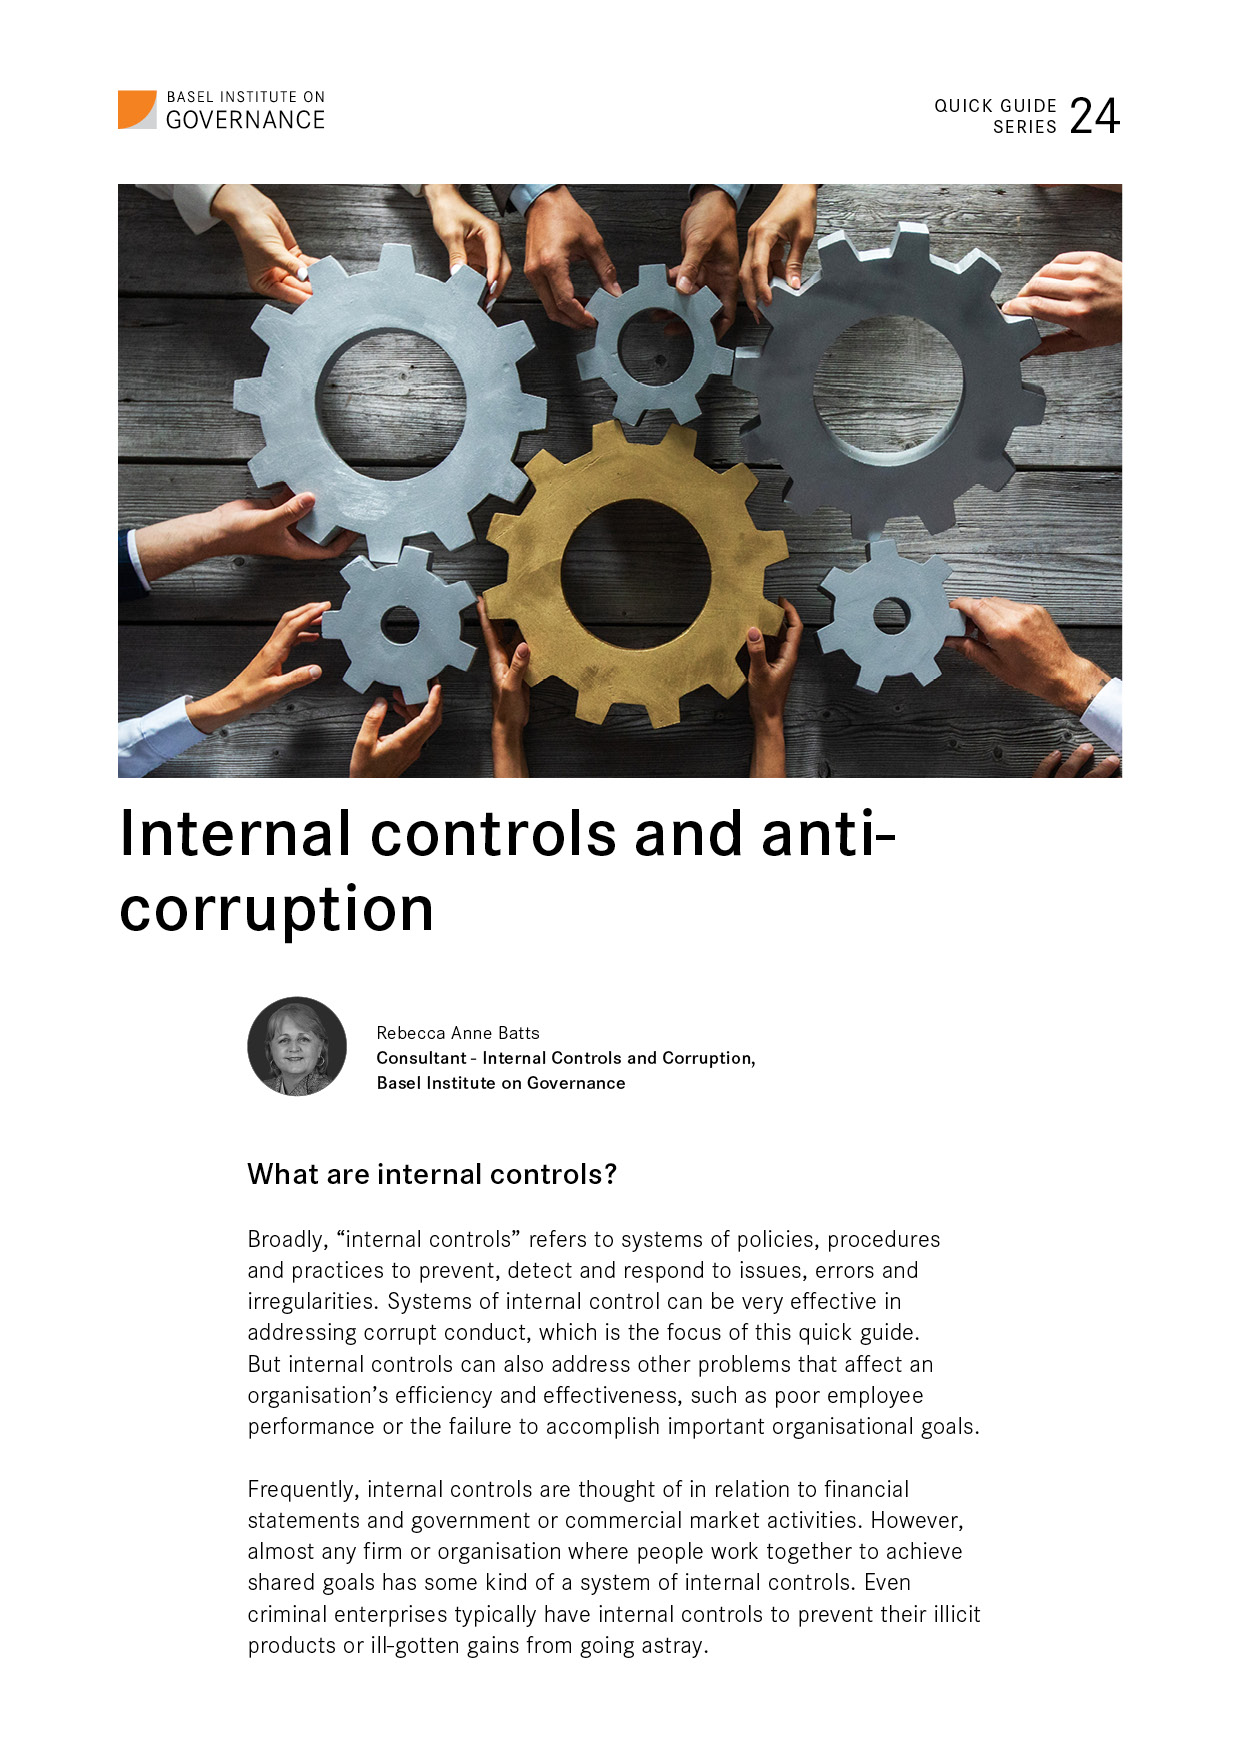 Quick guide to internal controls and anti-corruption